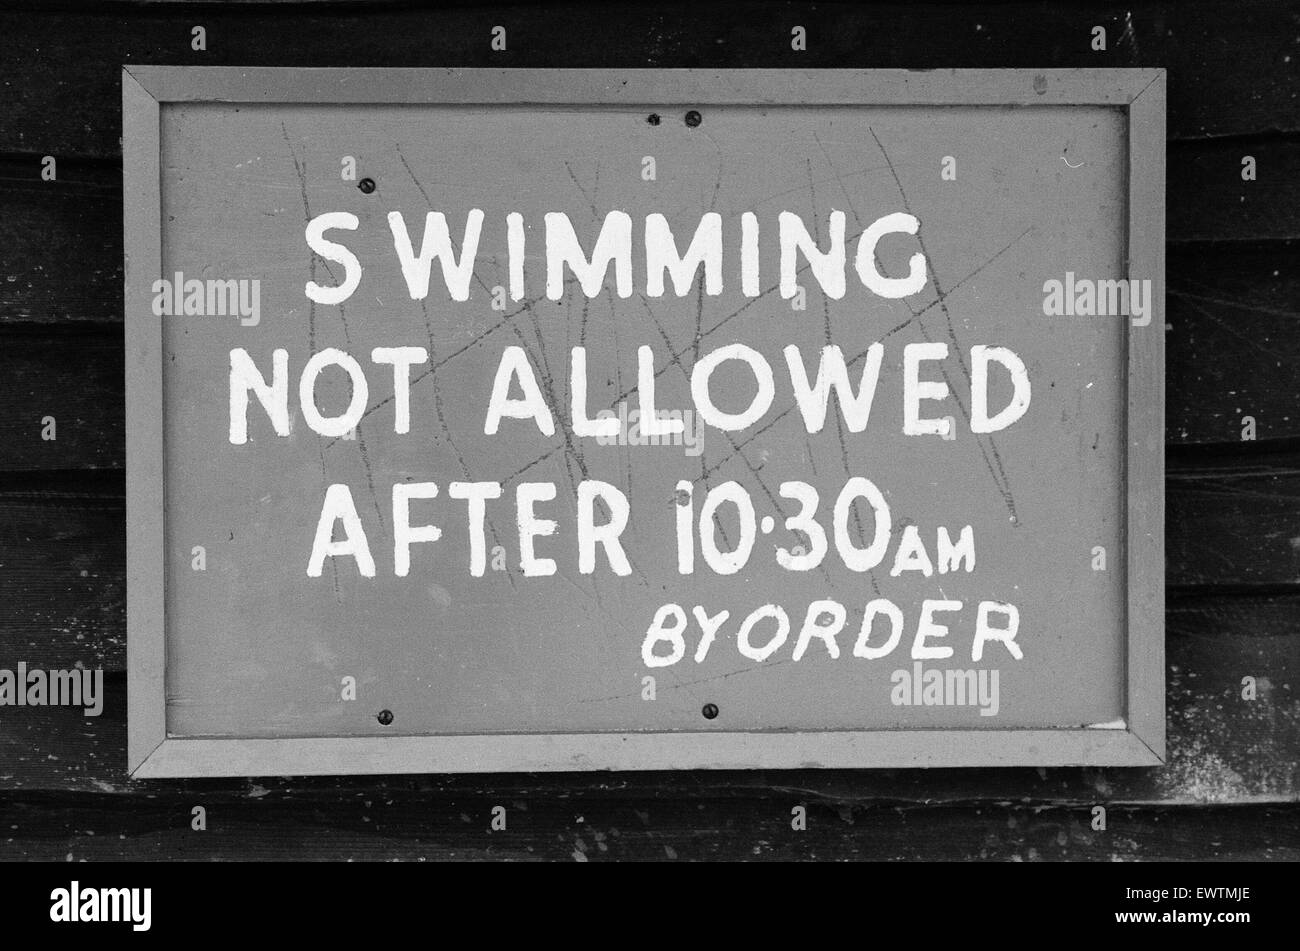 No Swimming Sign hear frozen lake, Sutton Park, Birmingham, England, 17th February 1986. Swimming Not Allowed After 1030am By Order. Stock Photo